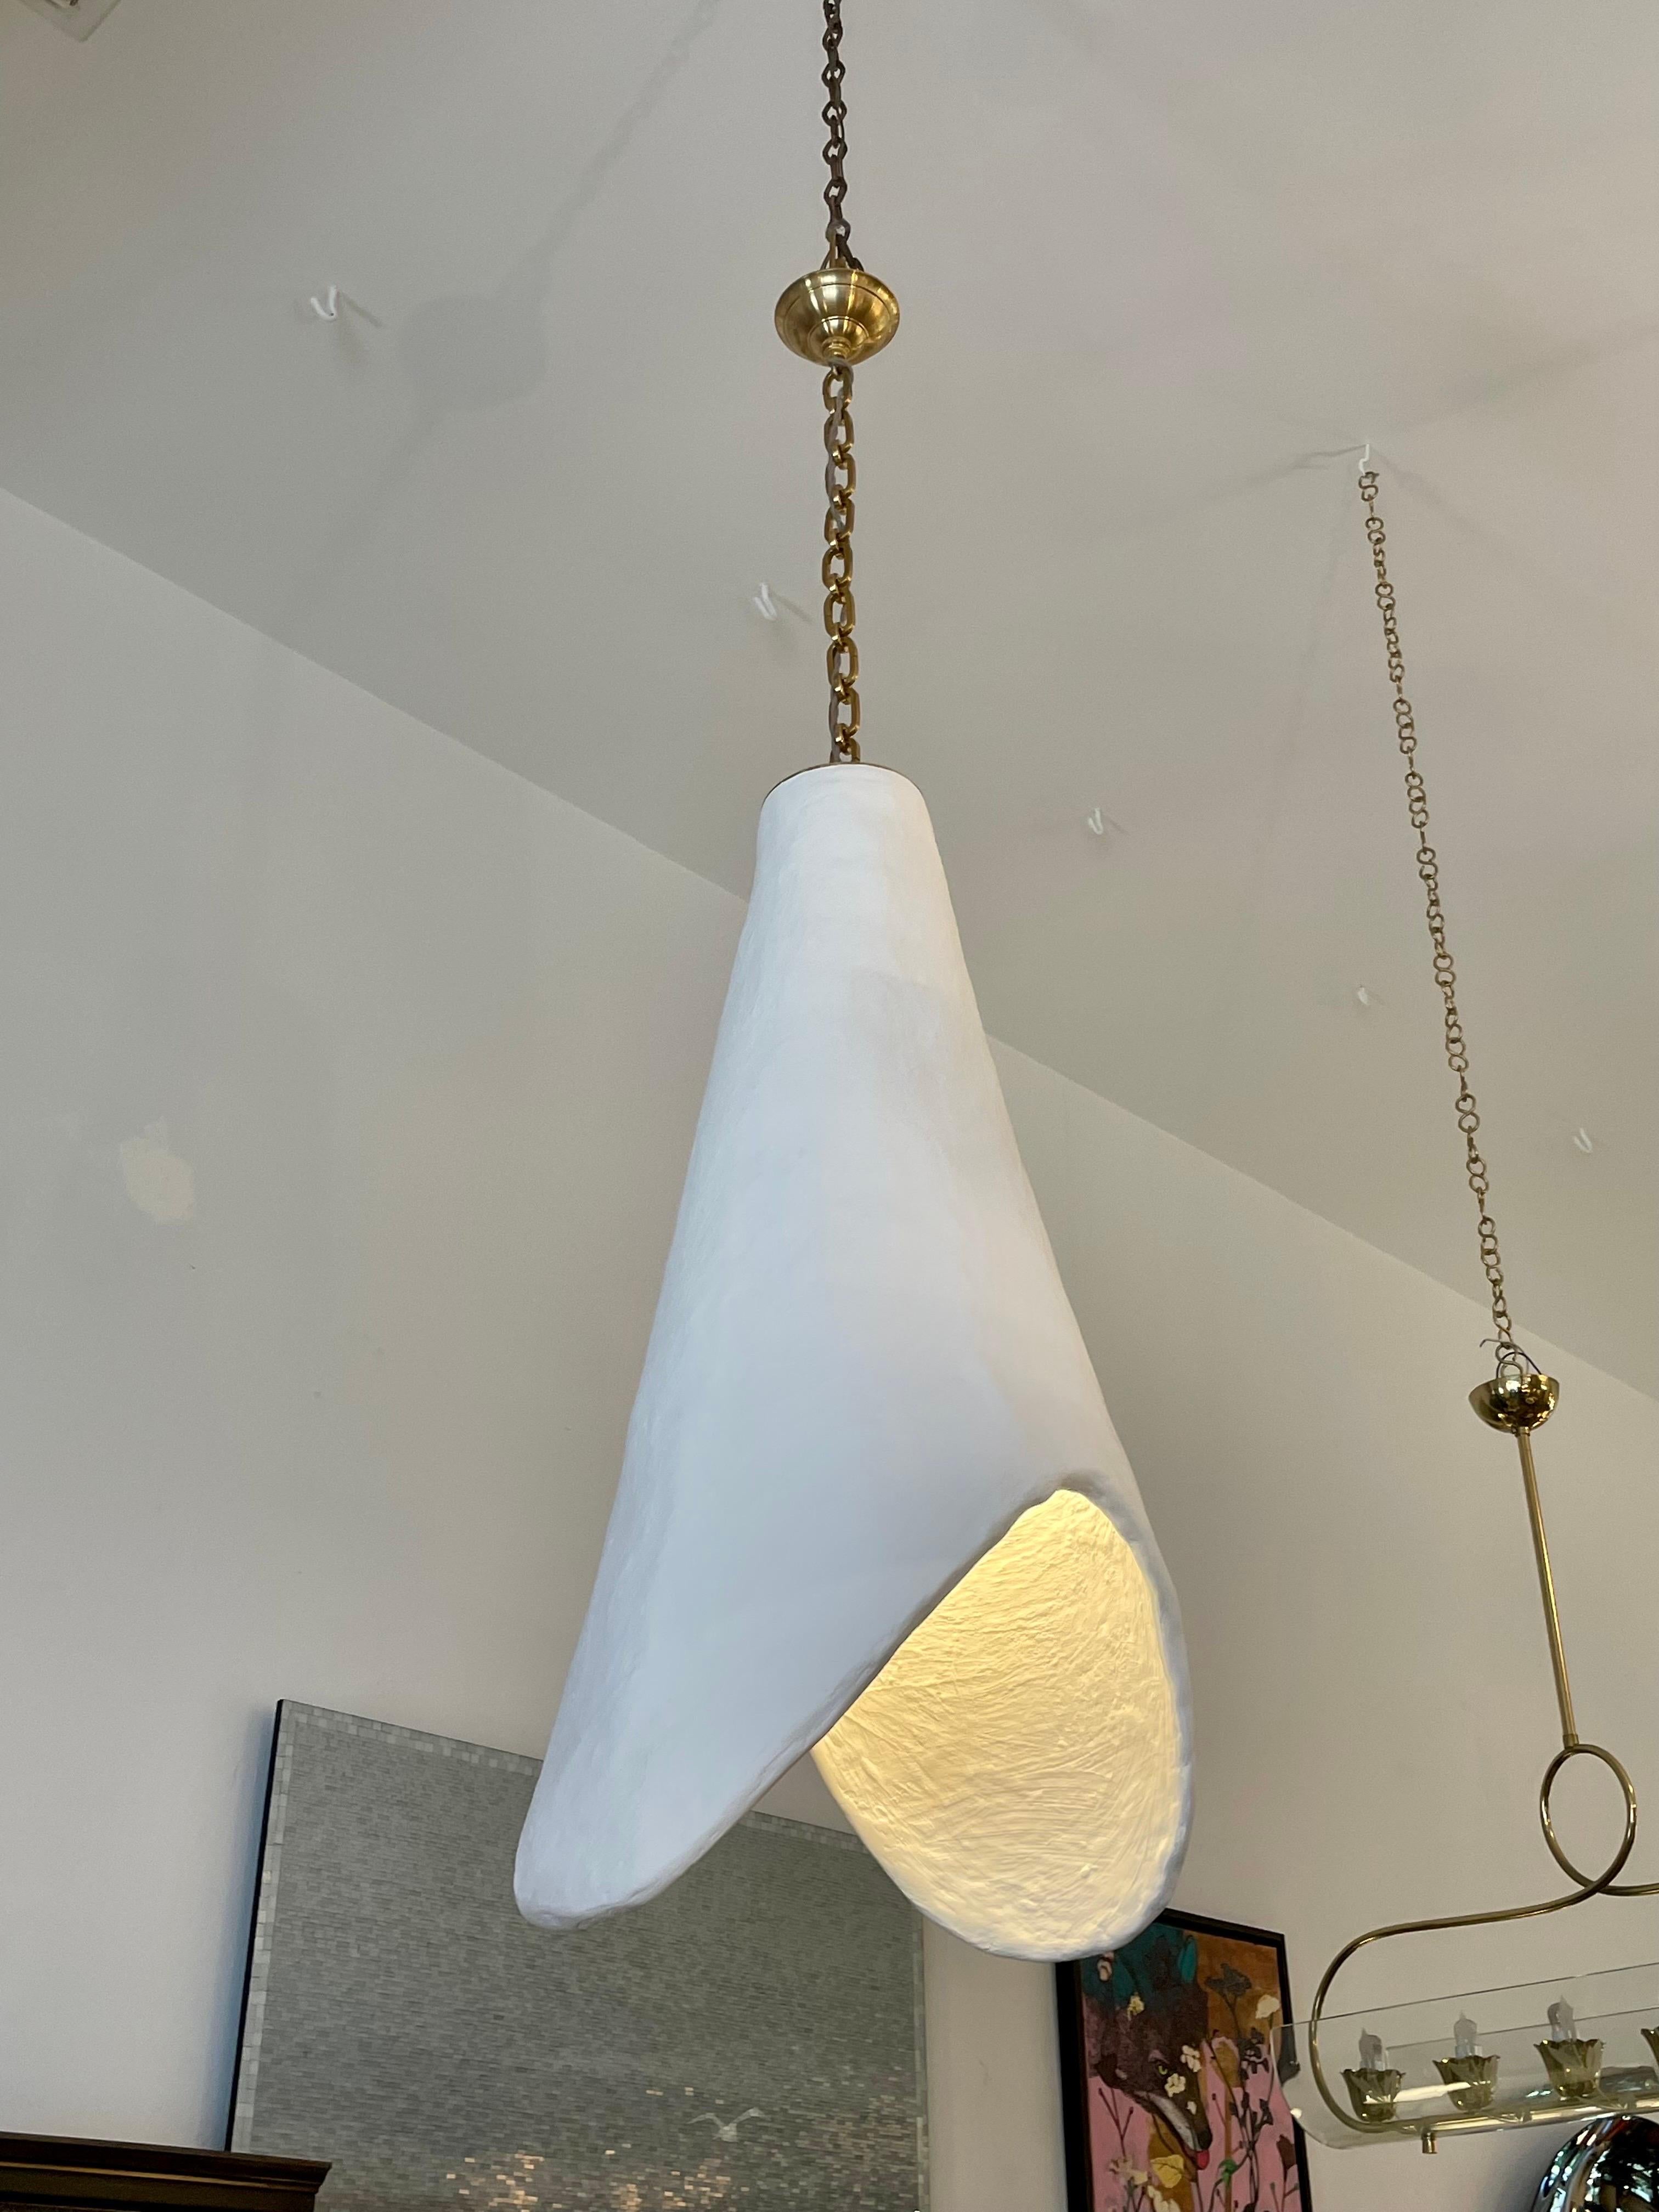 A wonderful French plaster conical oversized pendant light (Two available - priced individually)

Note: Height of plaster cone alone without chain is 36 inch.